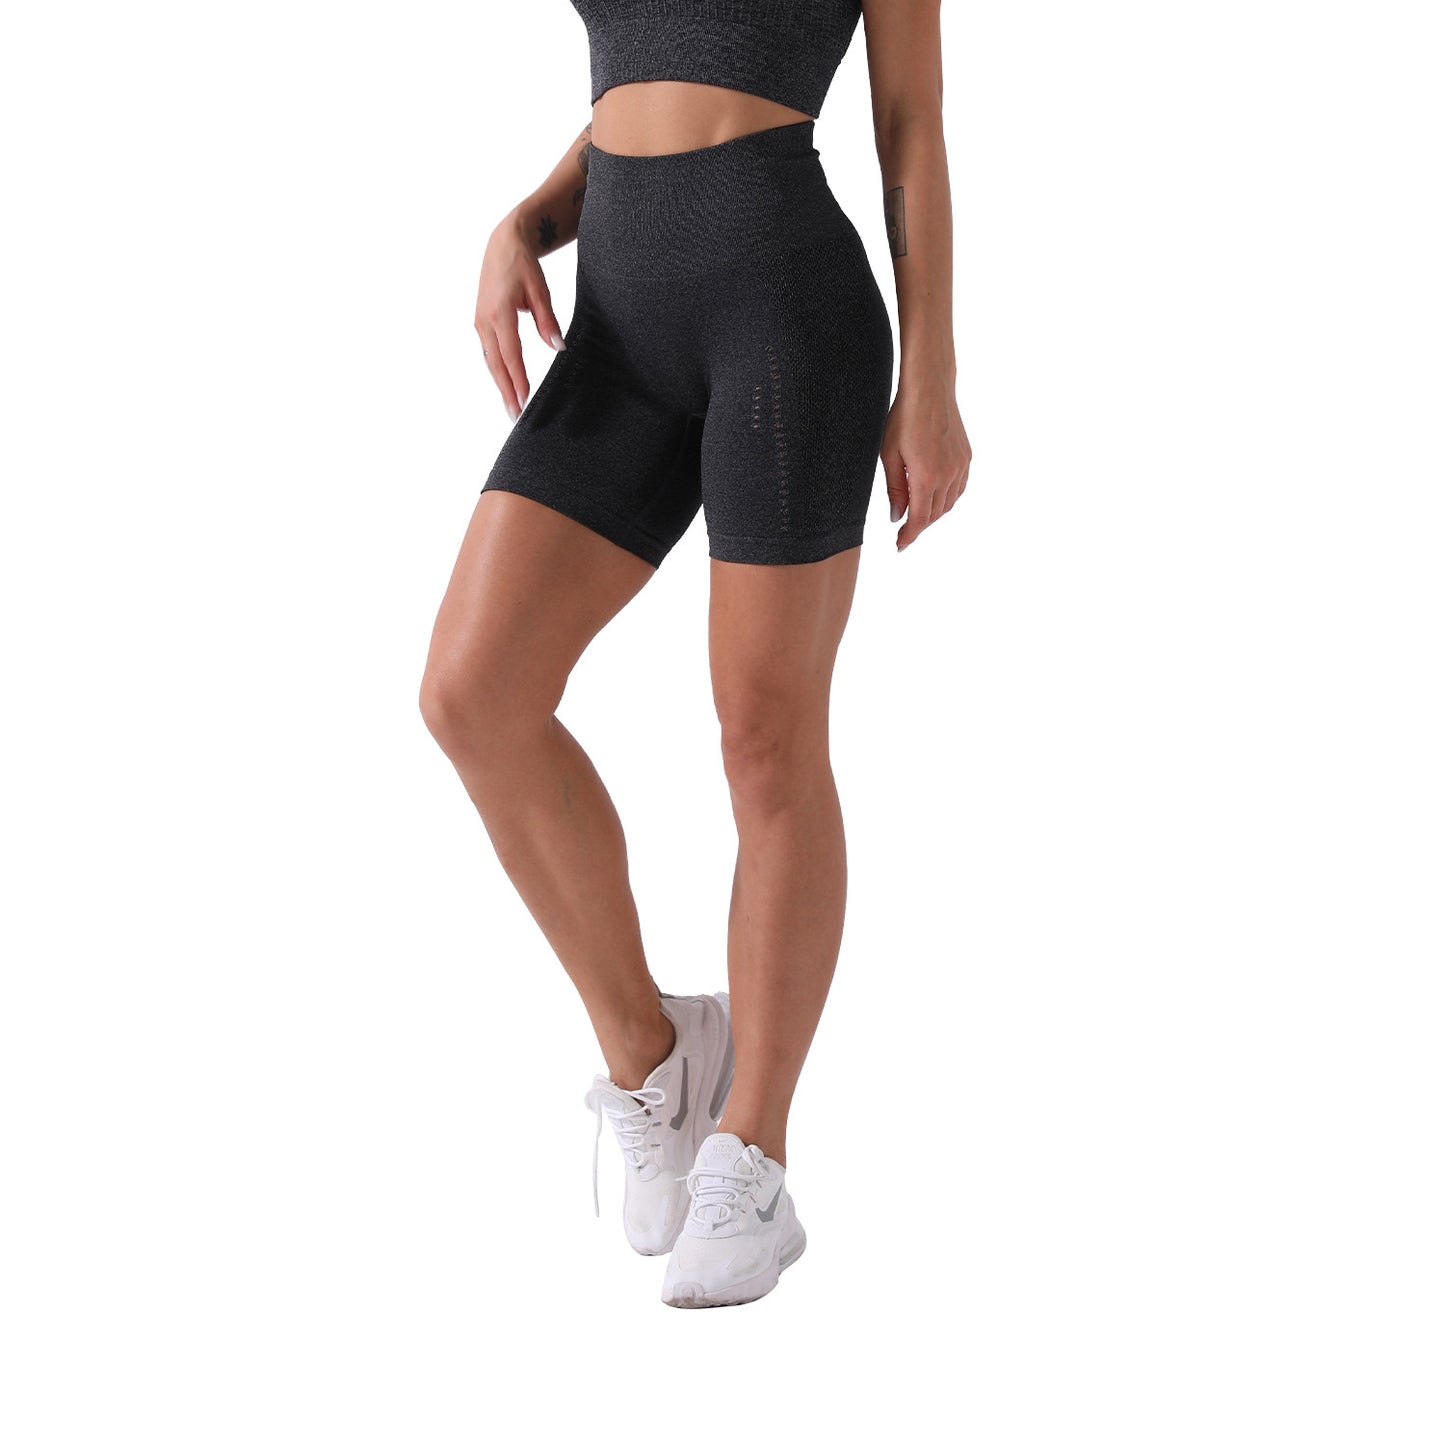 Spandex Solid Seamless Shorts* Women Soft Workout Tights Fitness Outfits Yoga Pants Gym Wear